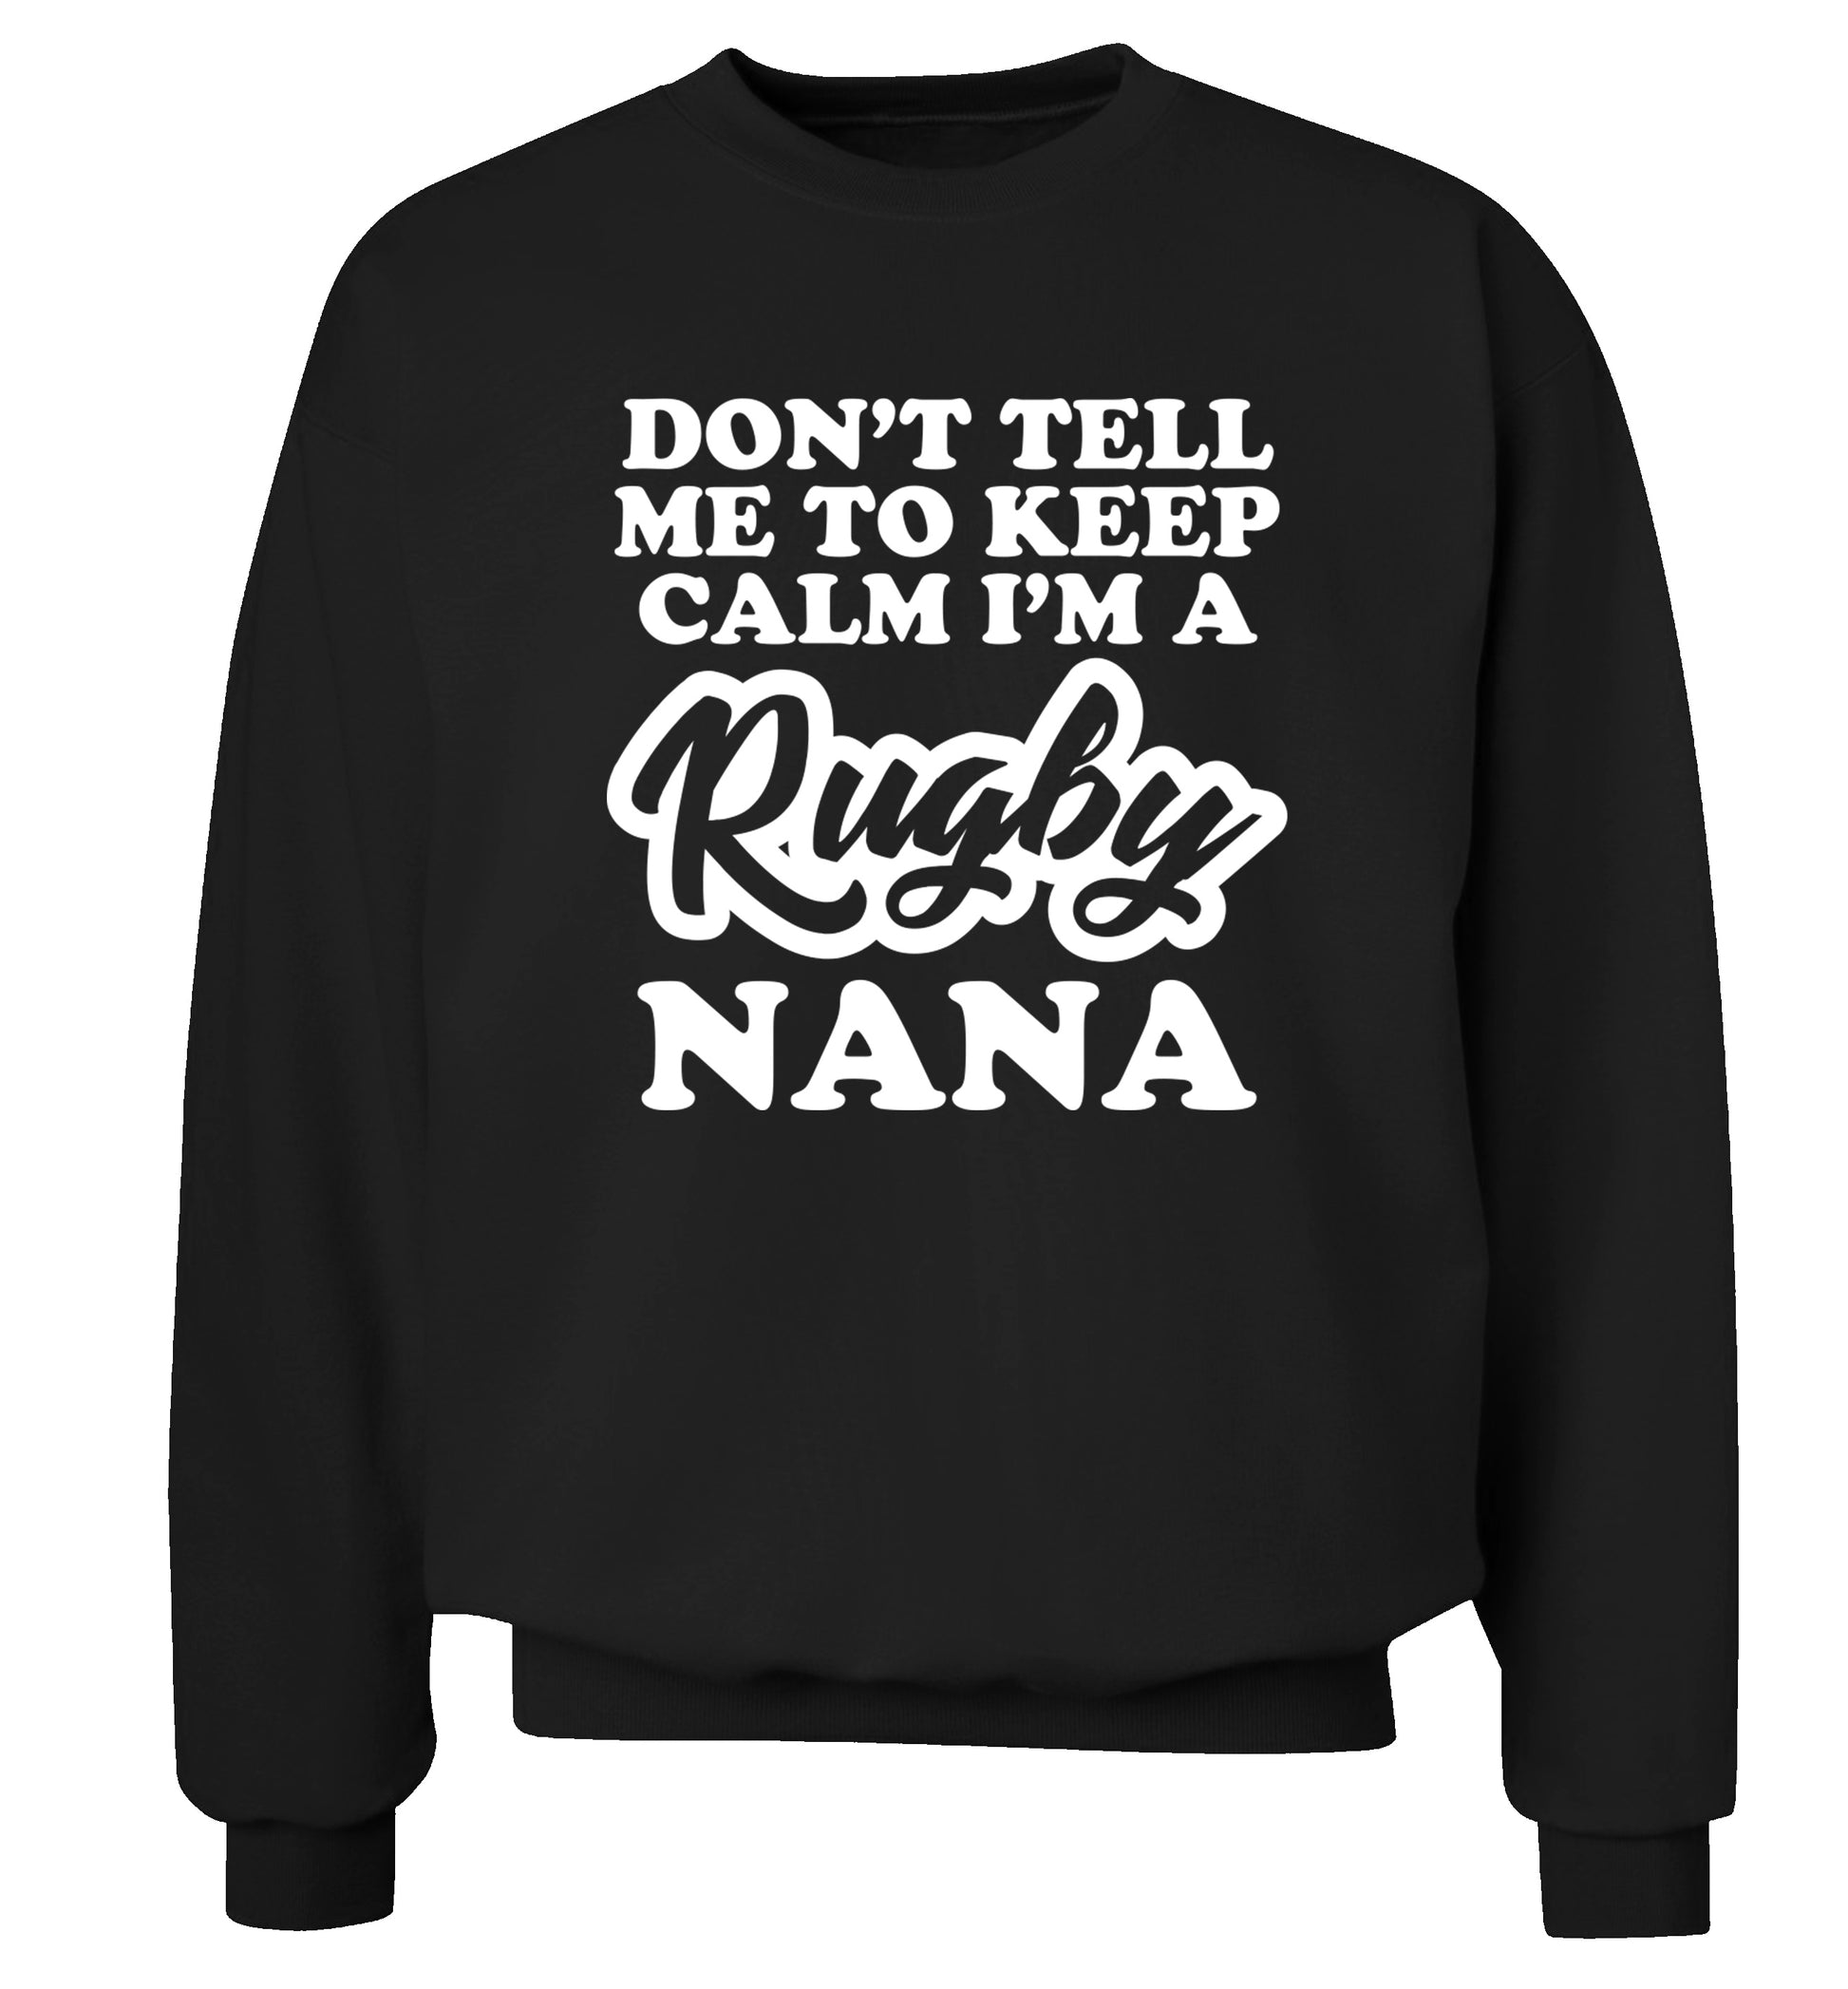 Don't tell me to keep calm I'm a rugby nana Adult's unisex black Sweater 2XL